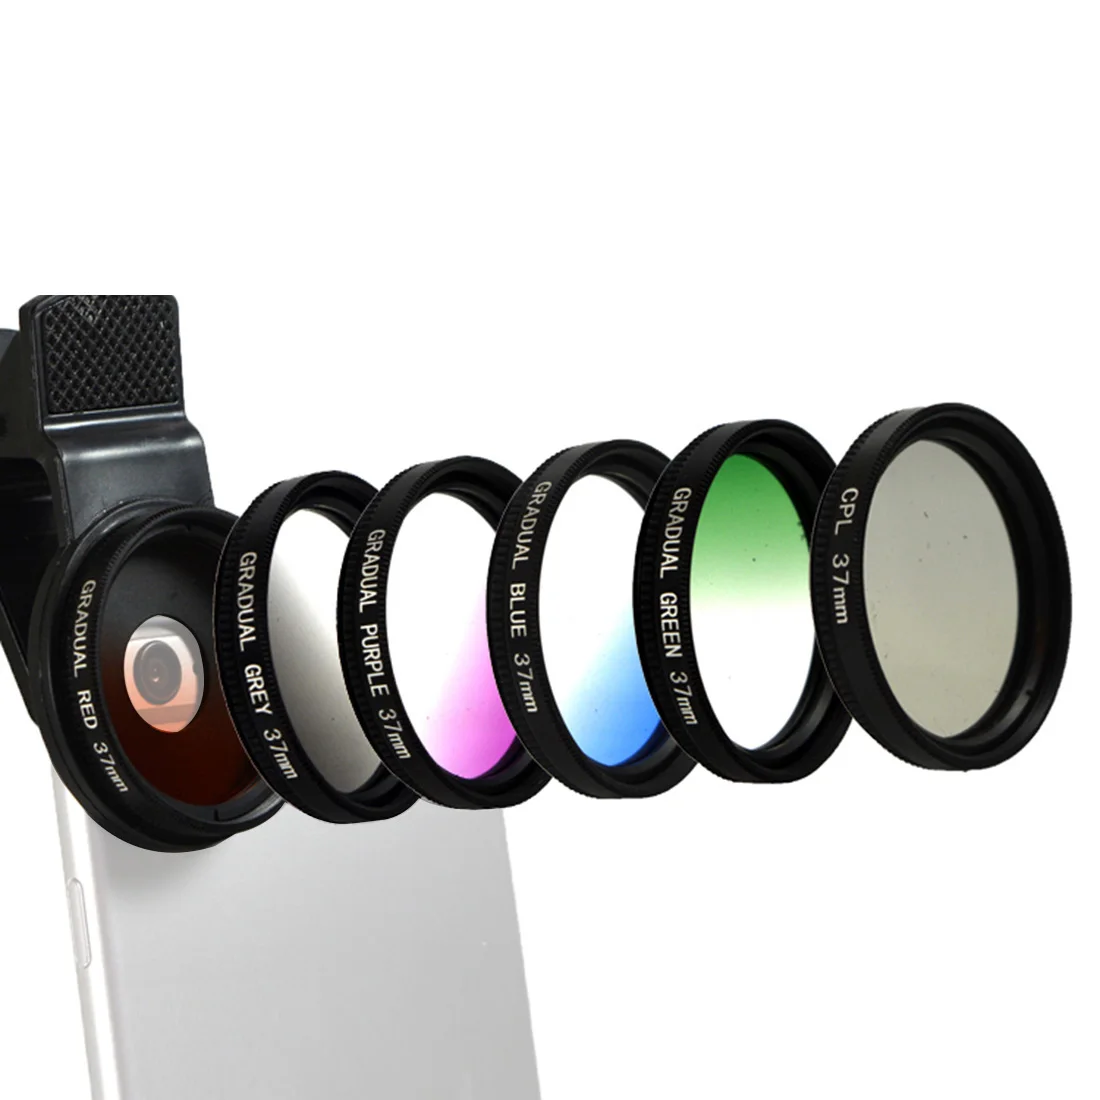 

12in1 37mm Gradient Filter Camera Lens Kit Grad Blue Red Filter+CPL+ND+Star Filter 0.45x Wide Angle +20x Macro Phone Camera Lens